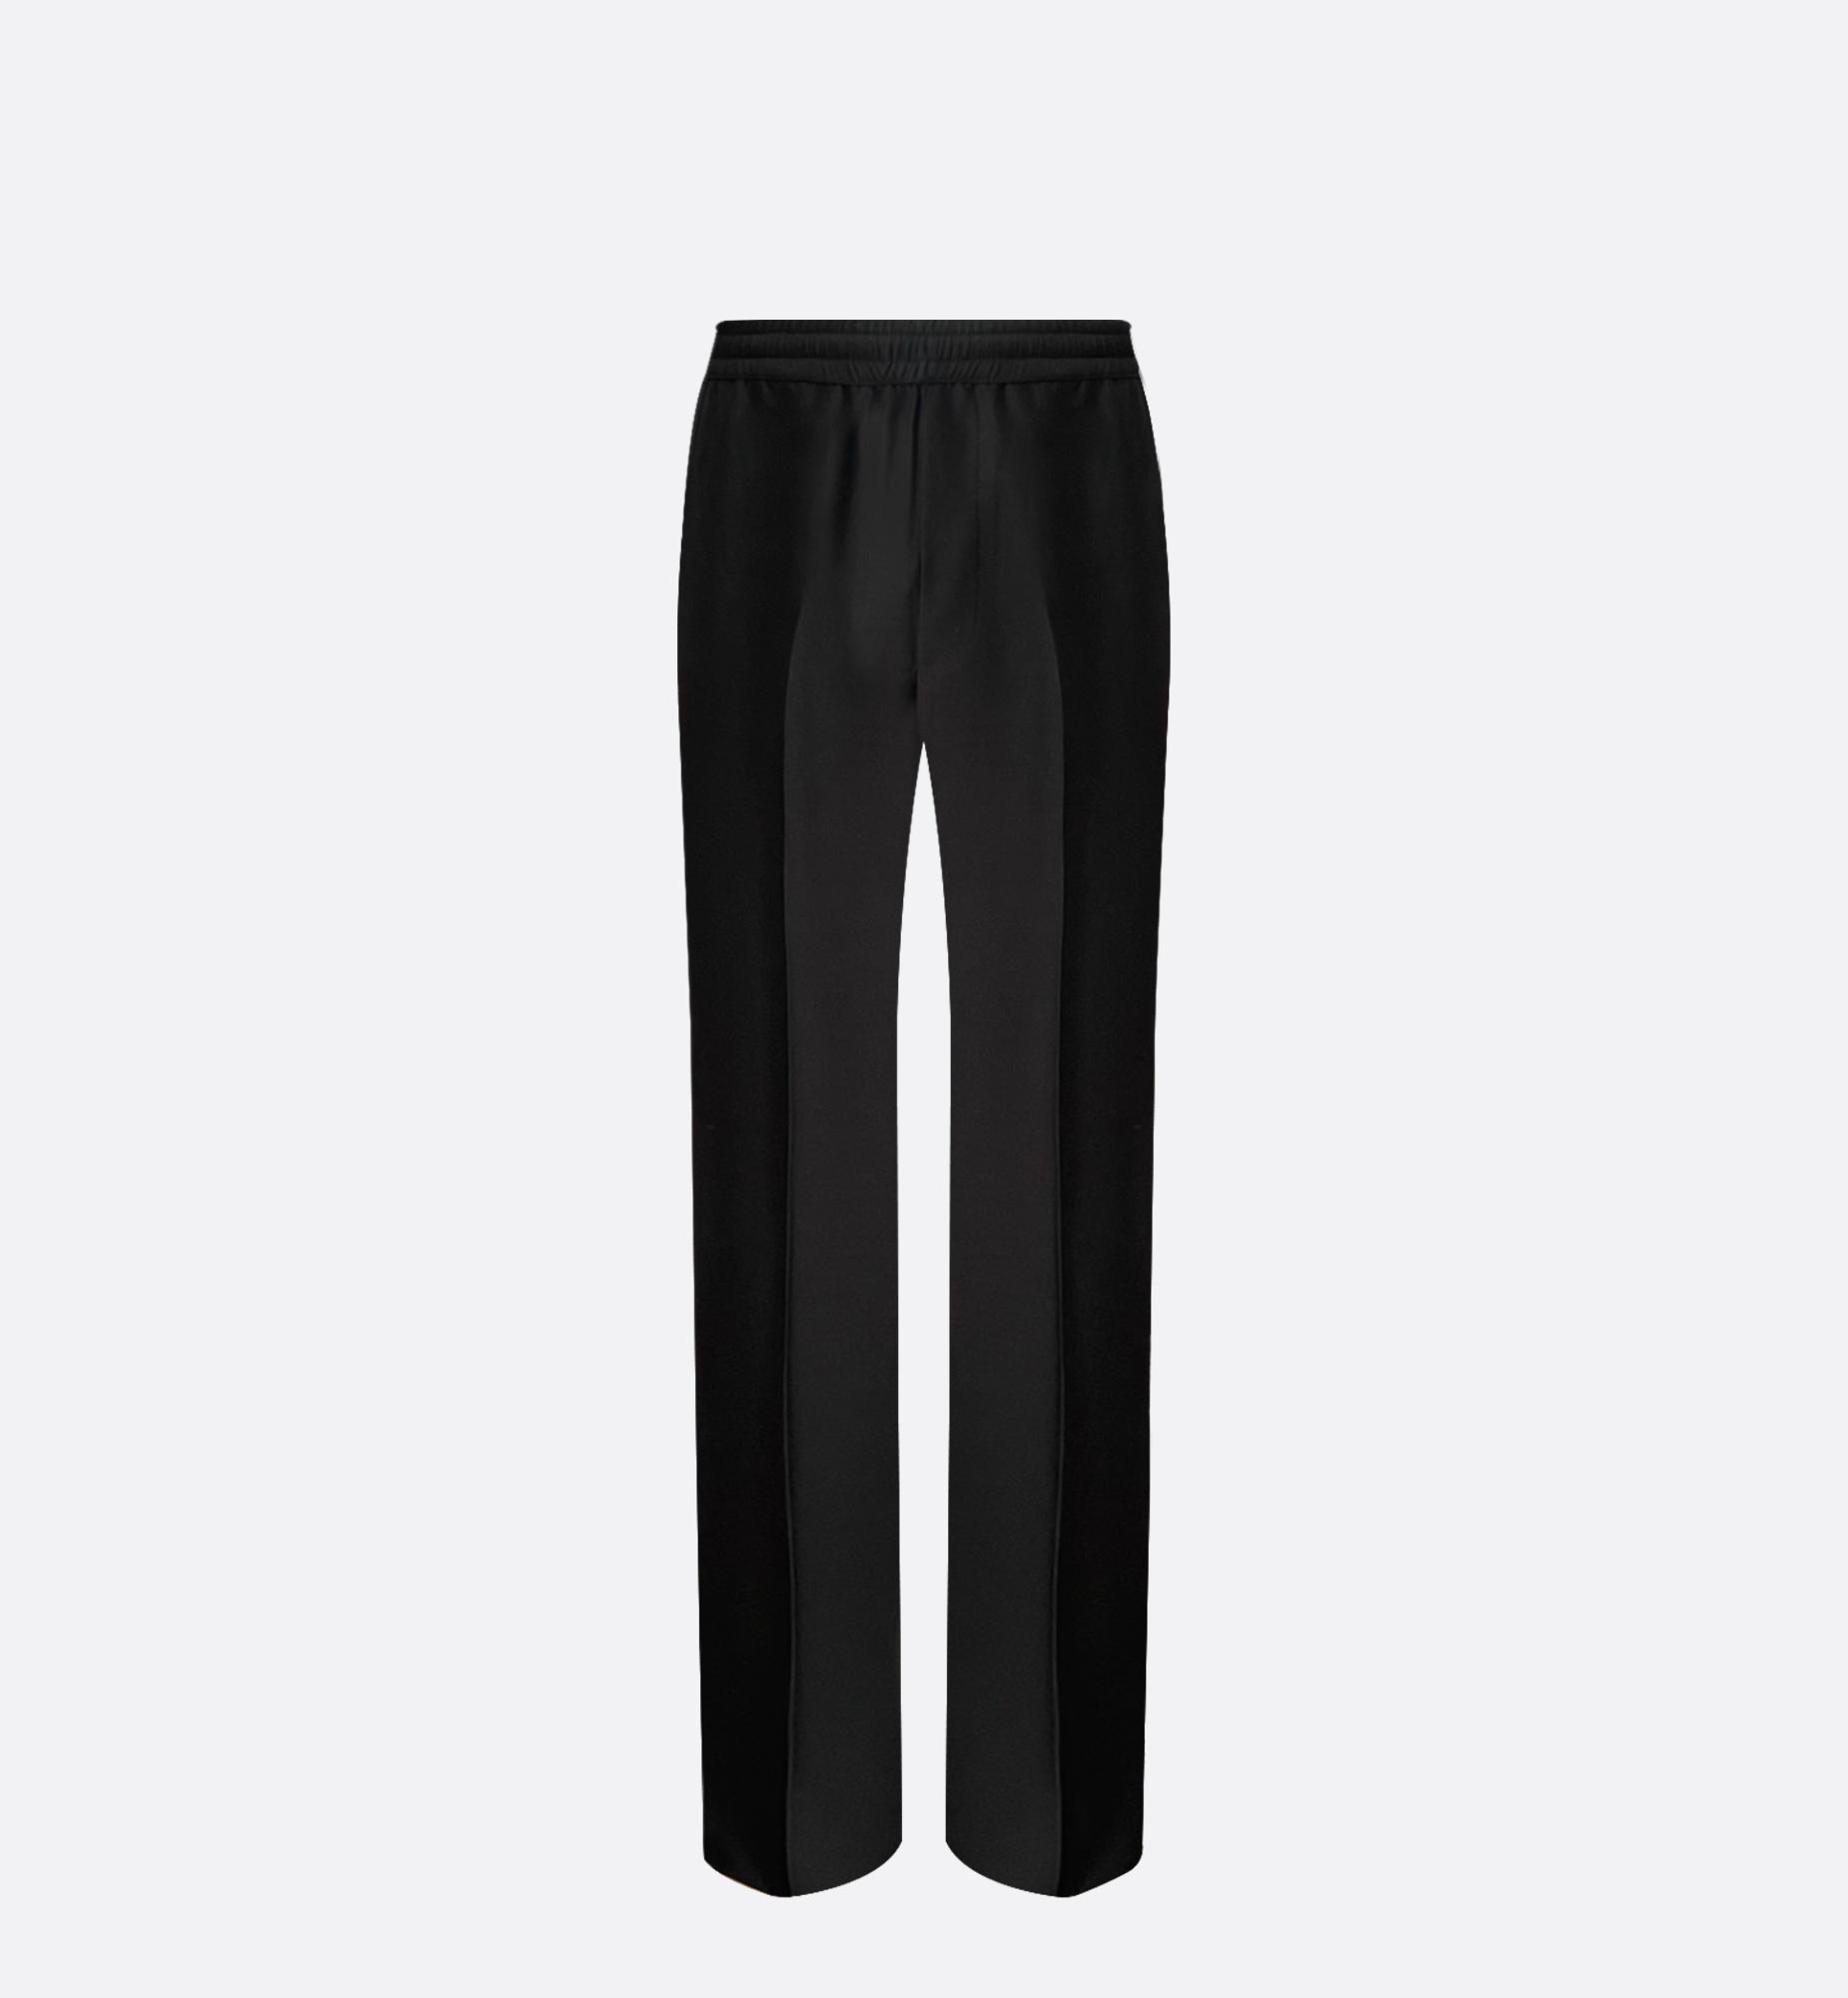 BLACK WOOL TROUSERS WITH ELASTIC BELT AND SIDE BANDS